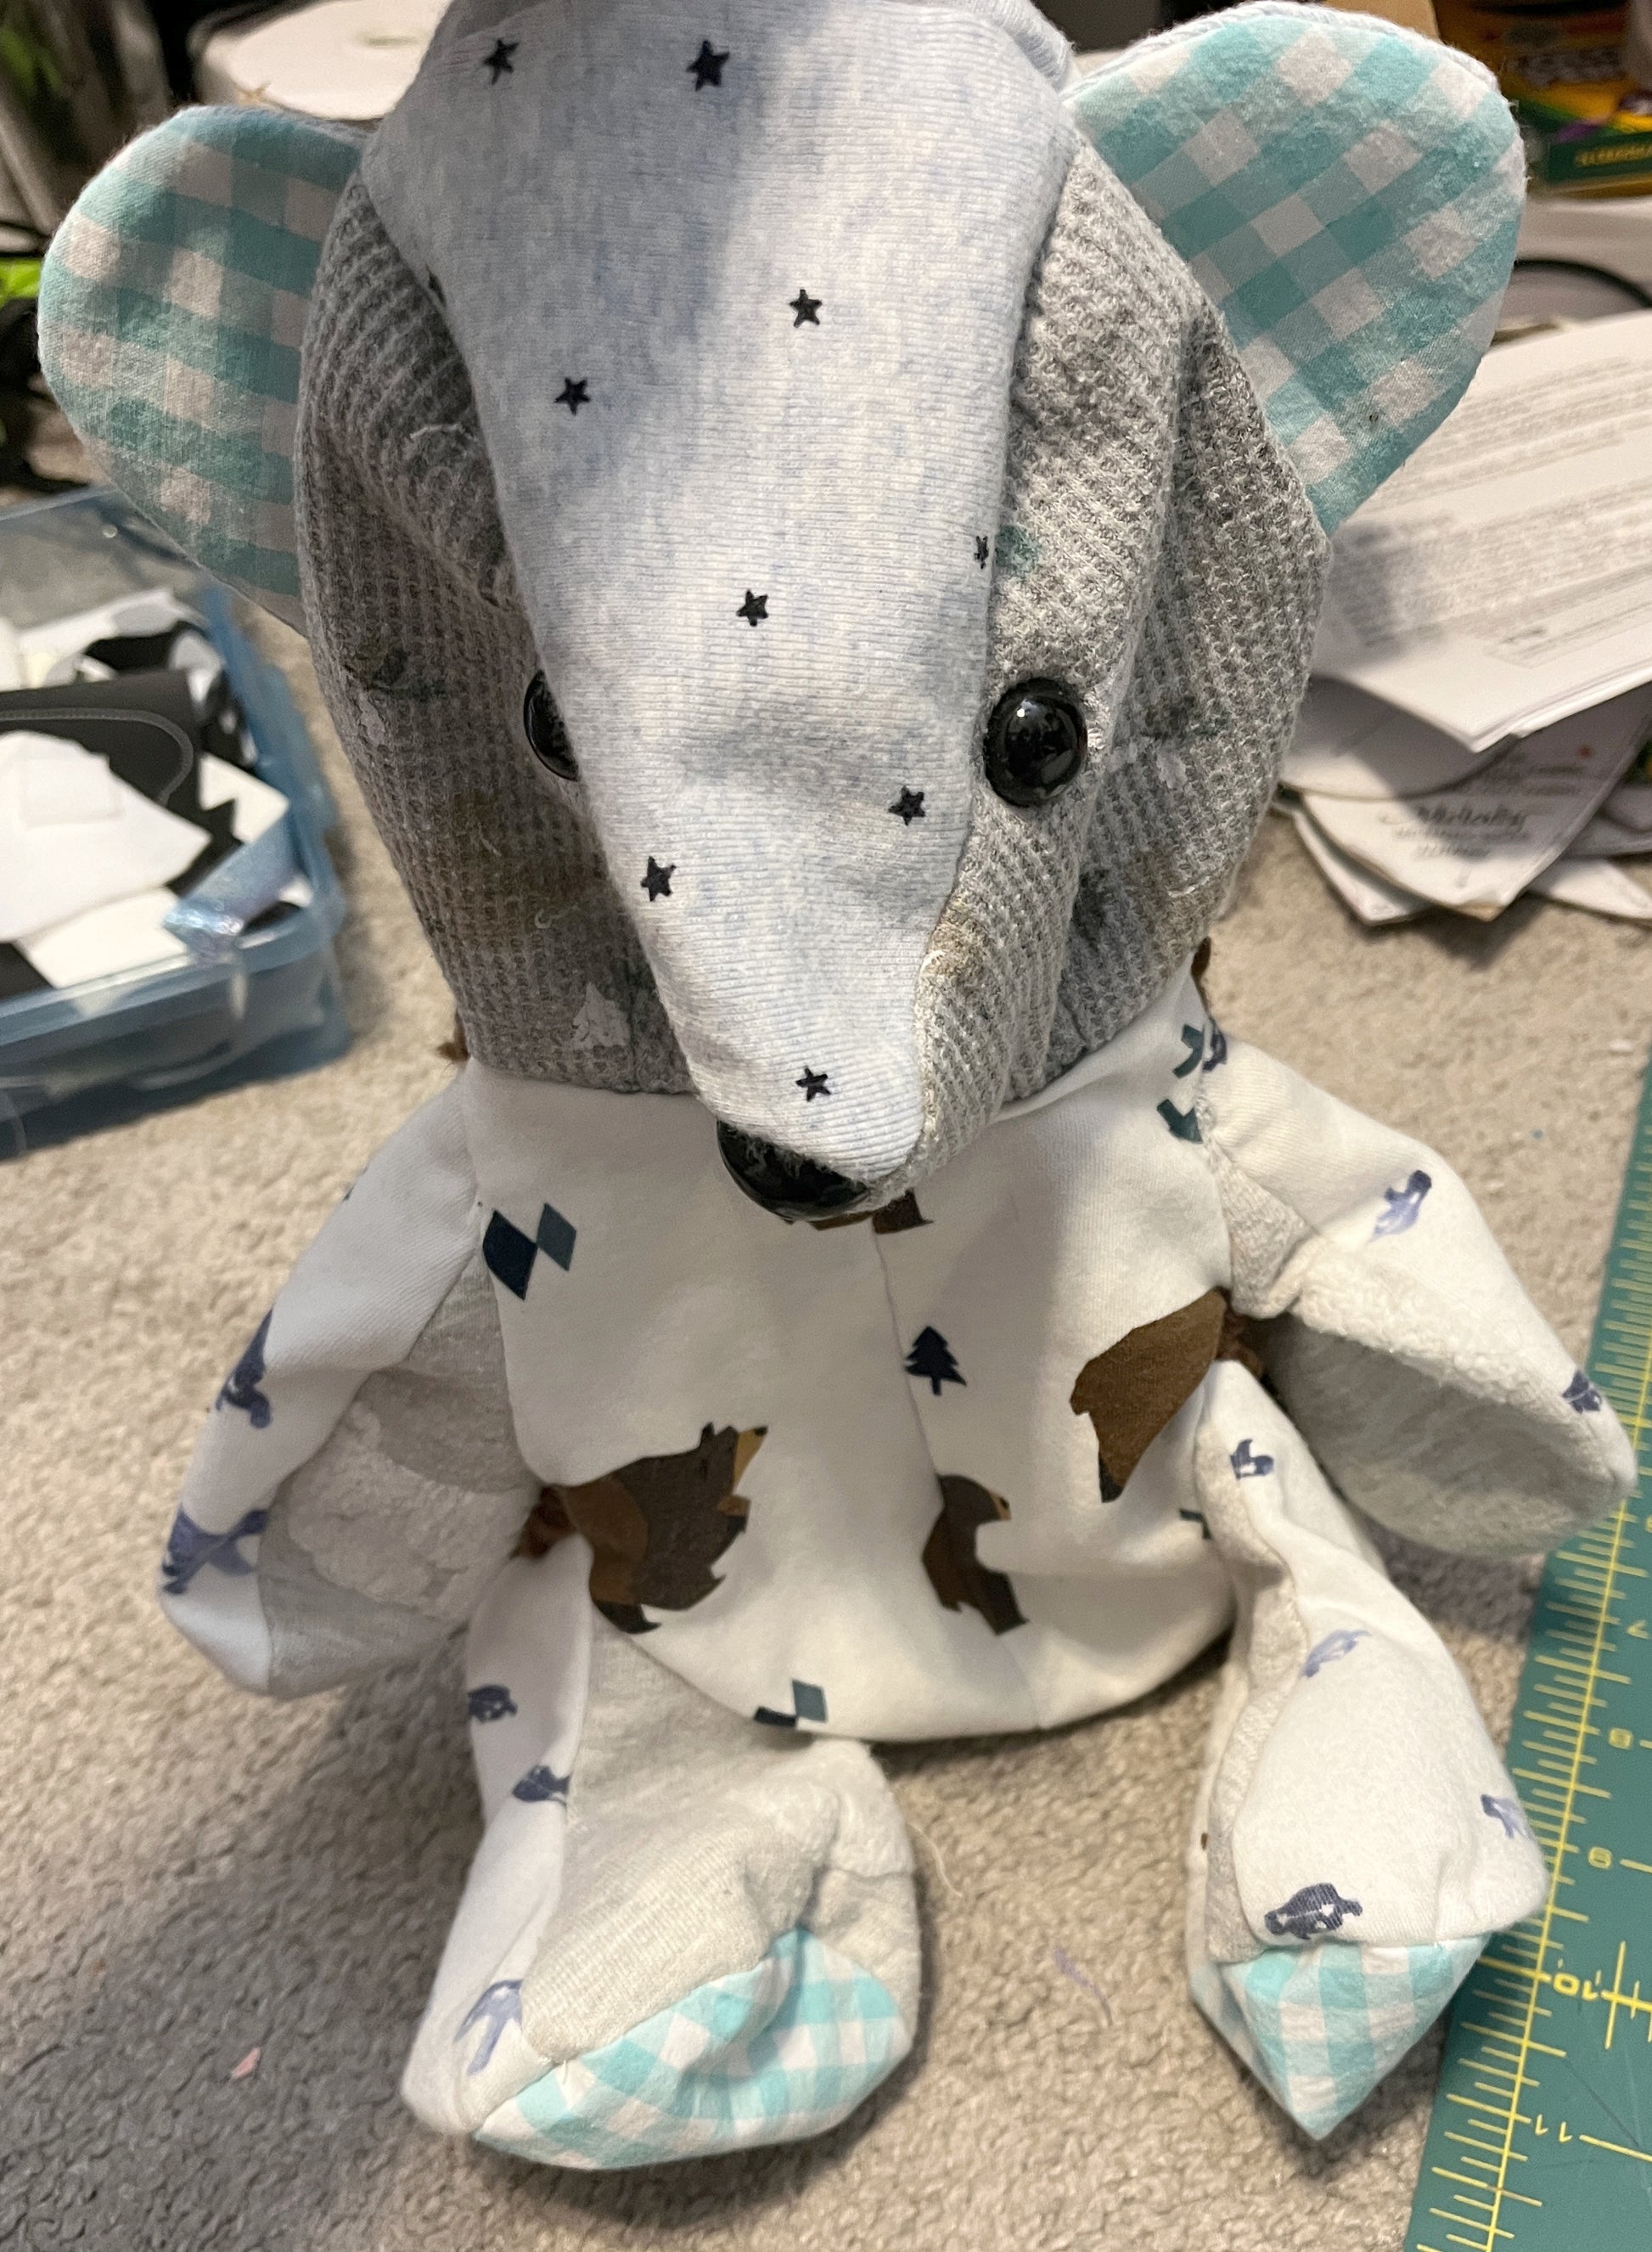 Bear ready to be stuffed. Bear made with baby clothes, 12-13" size.